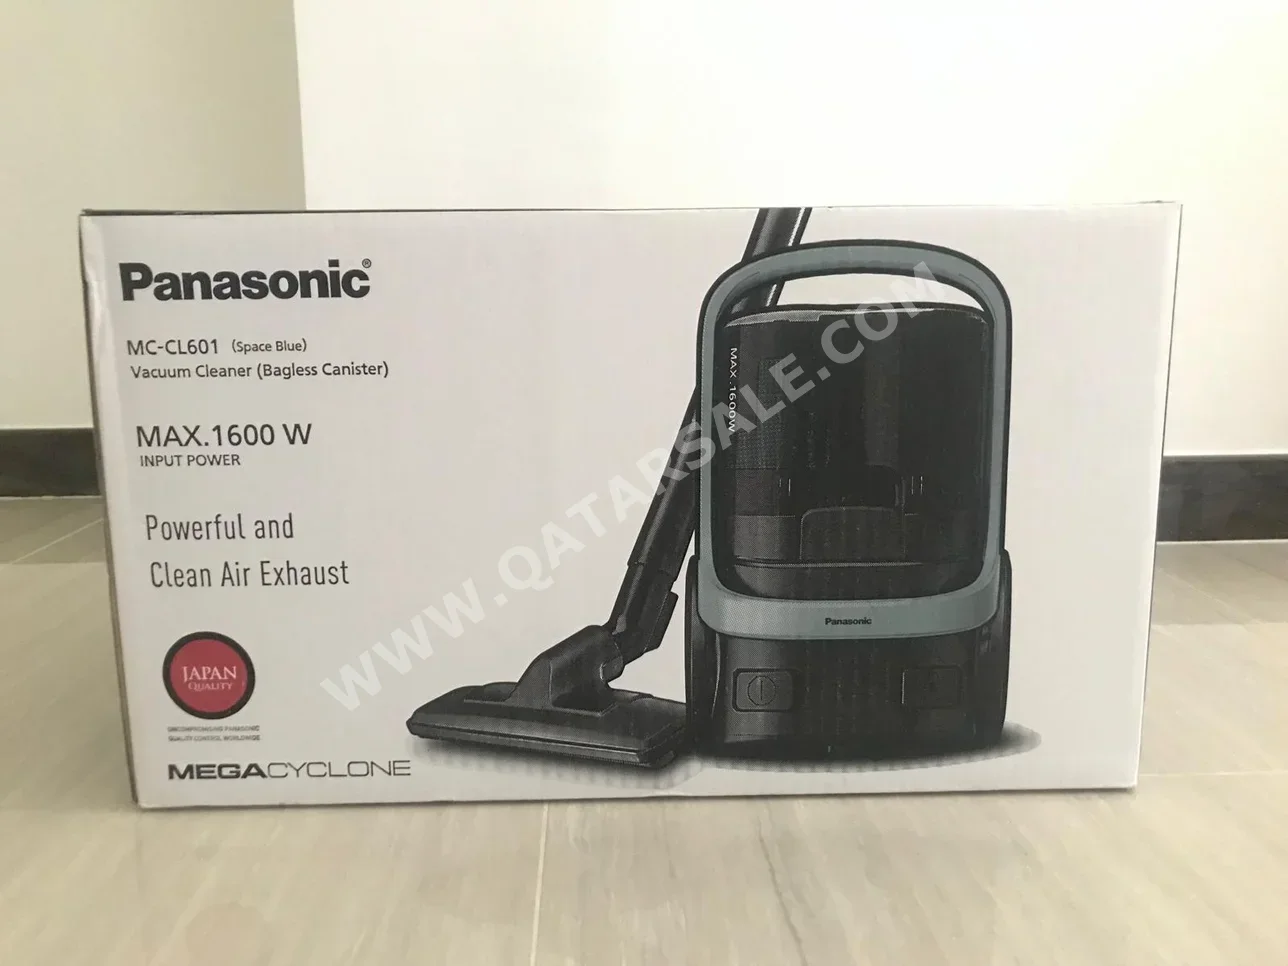 Panasonic  Blue  MC-CL601  Japan  Light Weight  Smart Enabled  Vacuum Bags Included  Bagless  Upholstery Tool Included  Mop Pads Included /  Canister Vacuum  2020  Quiet